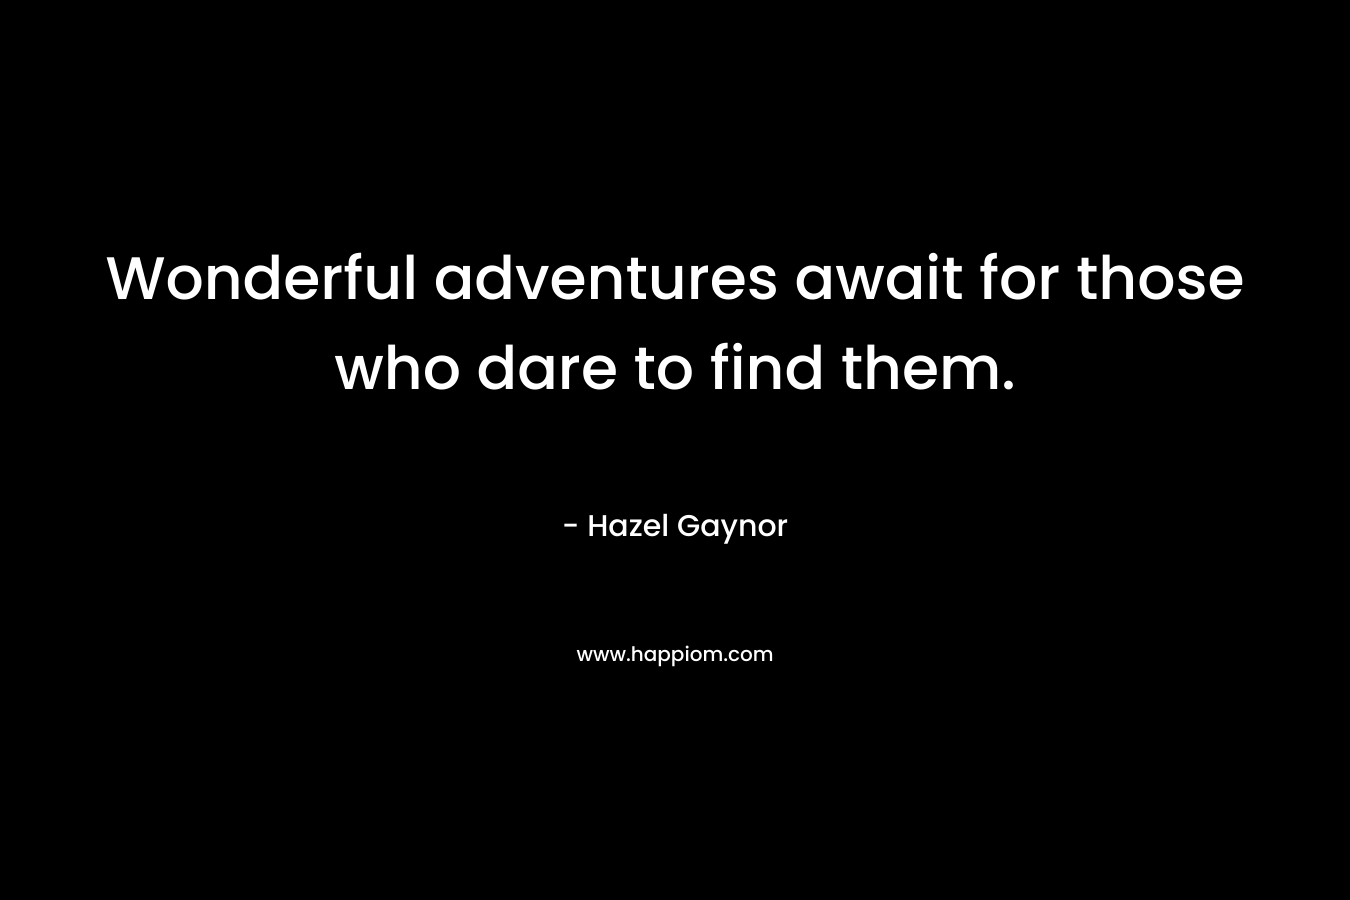 Wonderful adventures await for those who dare to find them.